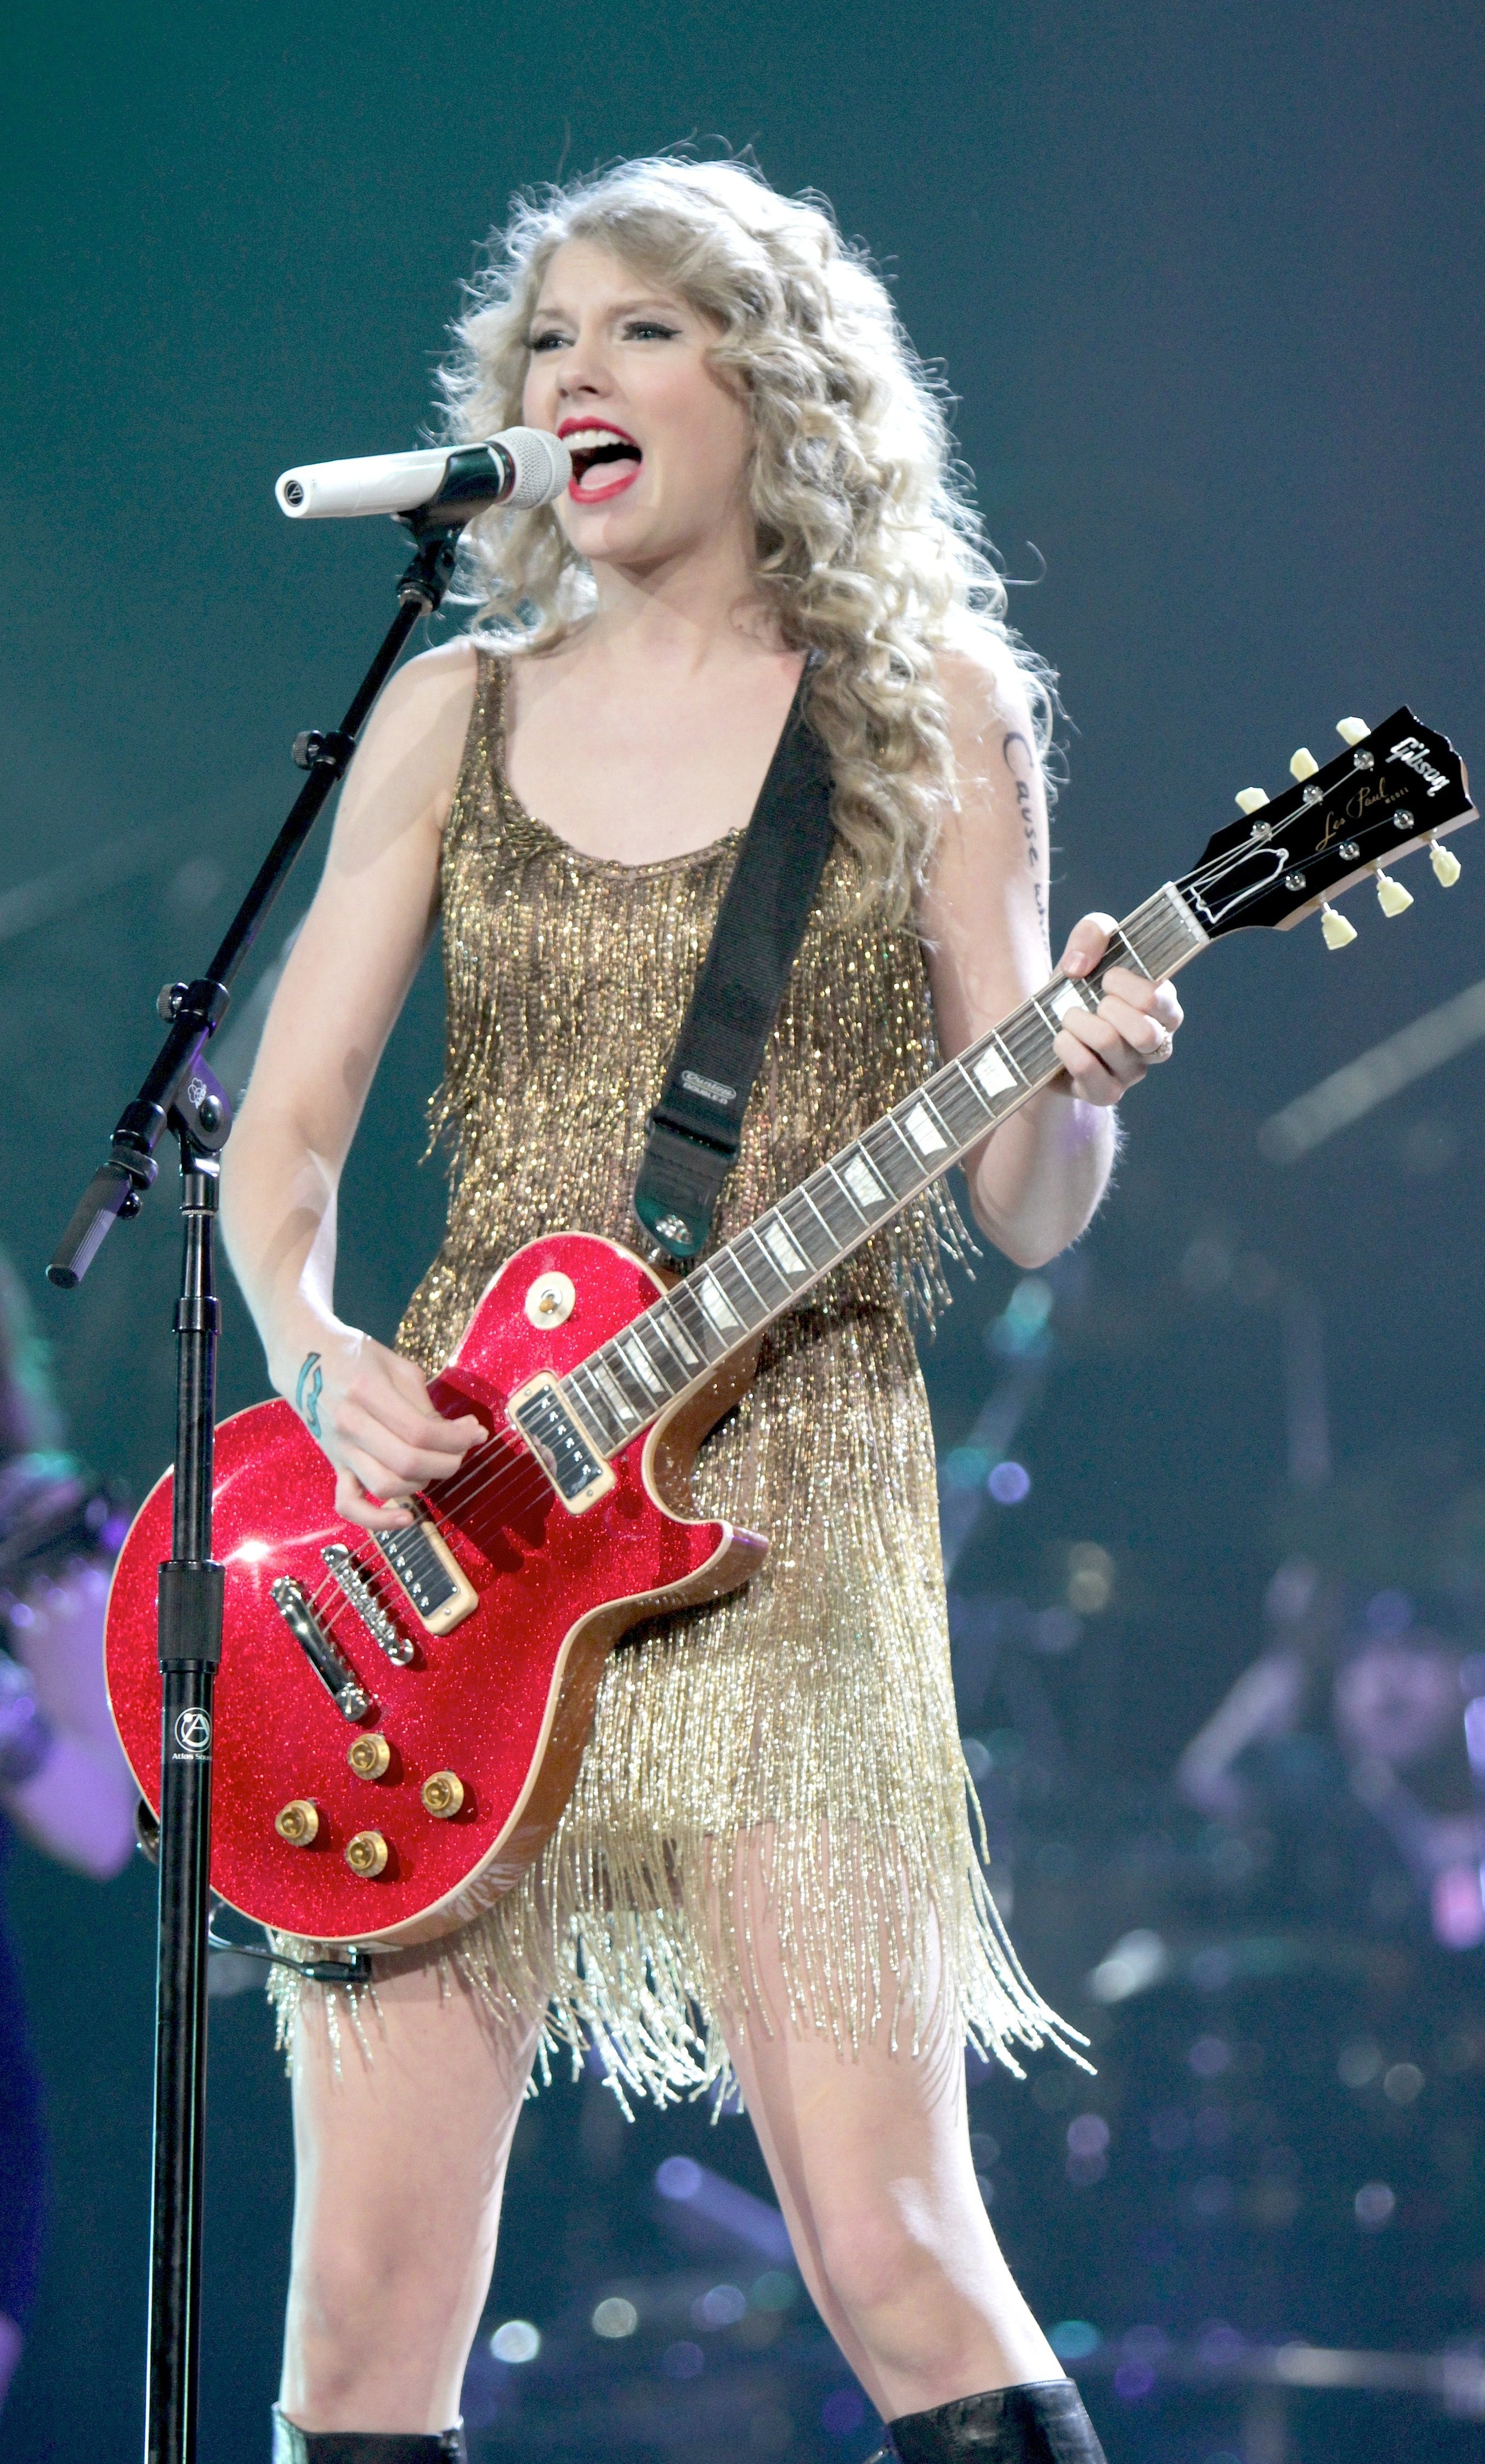 Photos: Five Reasons to Think Taylor Swift Is John Mayer's “Paper Doll”